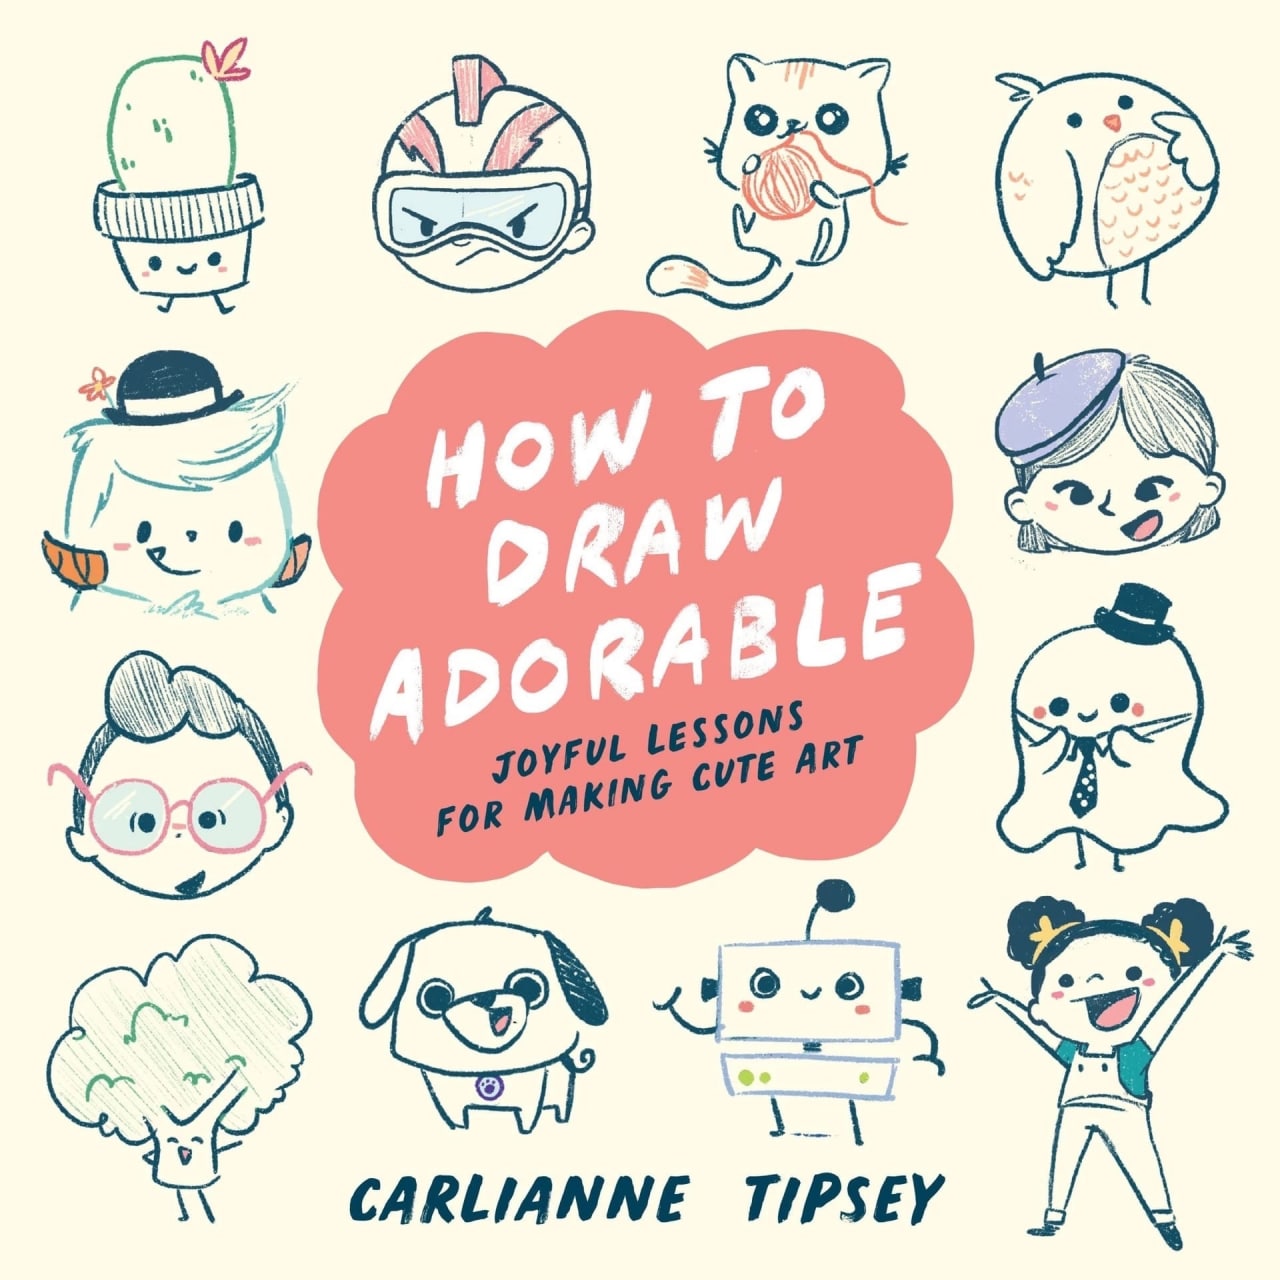 How to Draw Adorable by Carlianne Tipsey